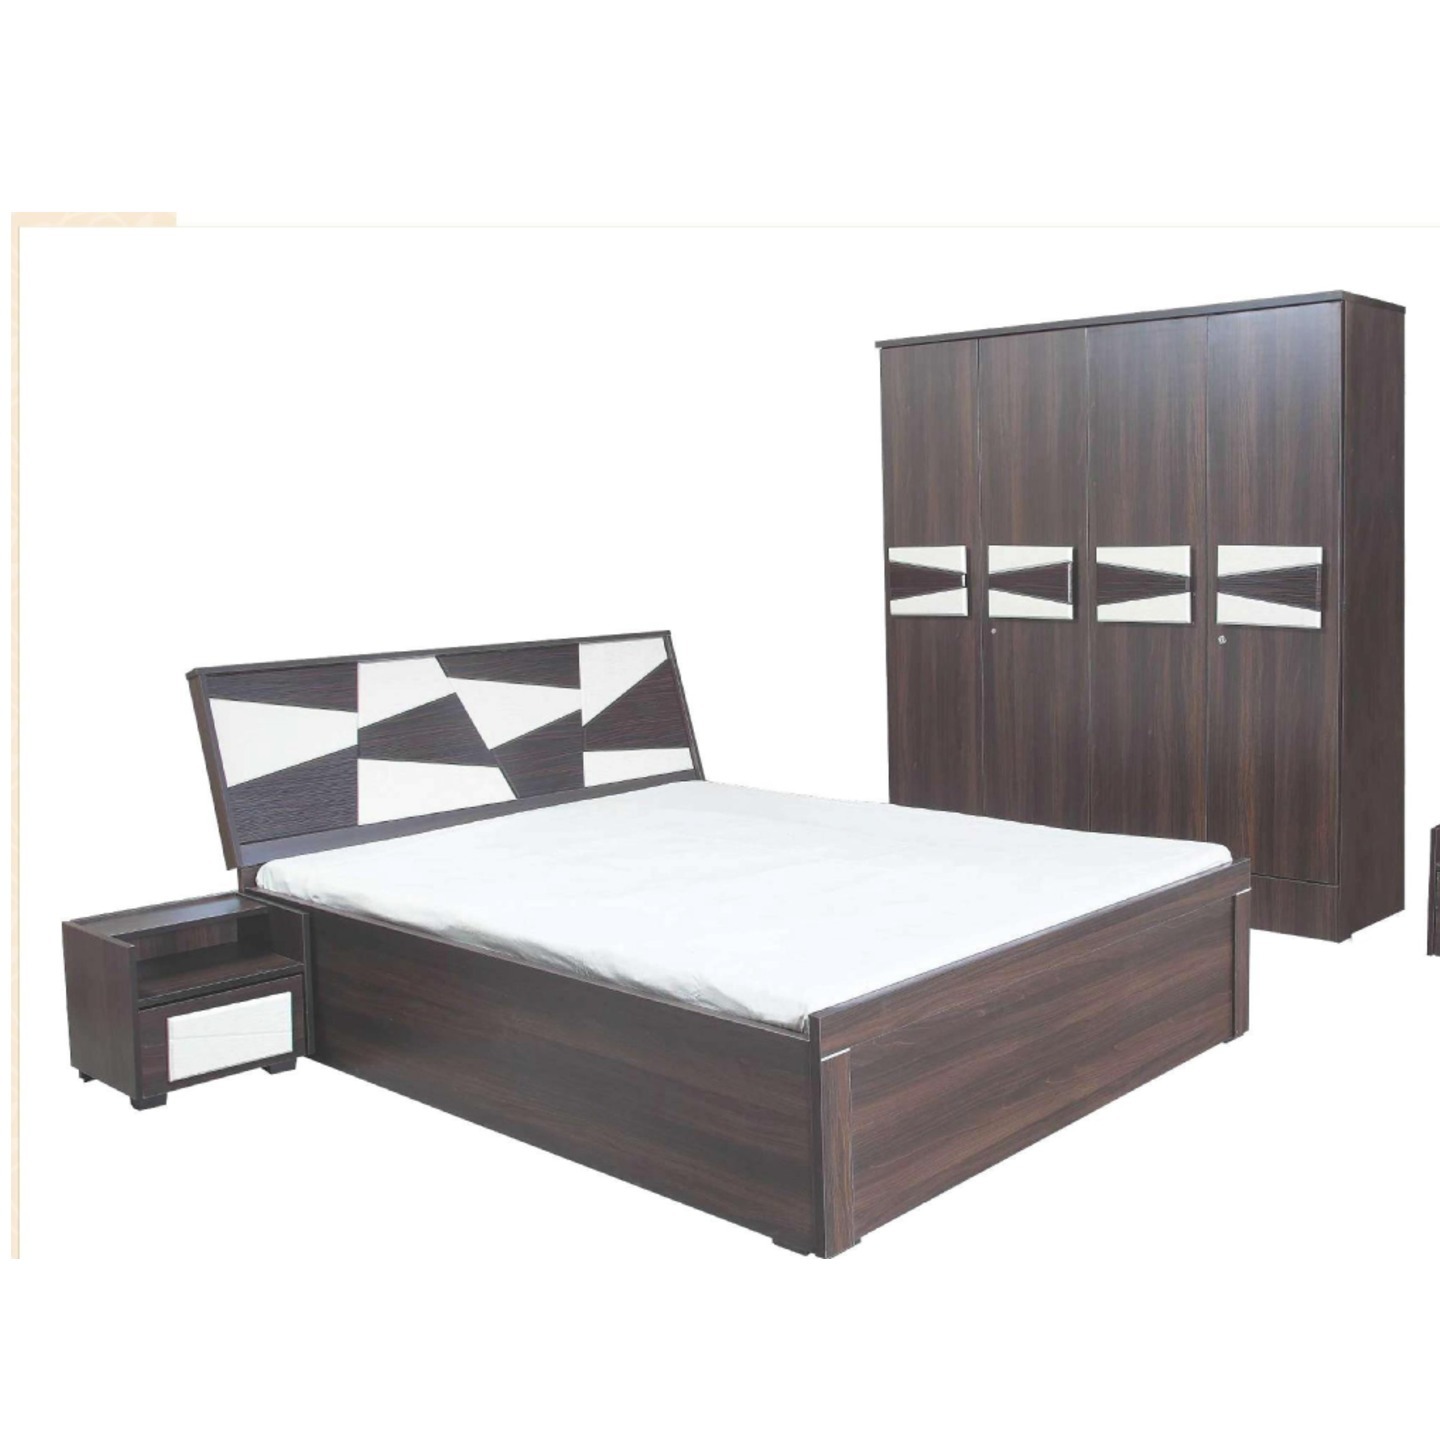 RD King Size Bed With Box Bed 78x 72 Tulip